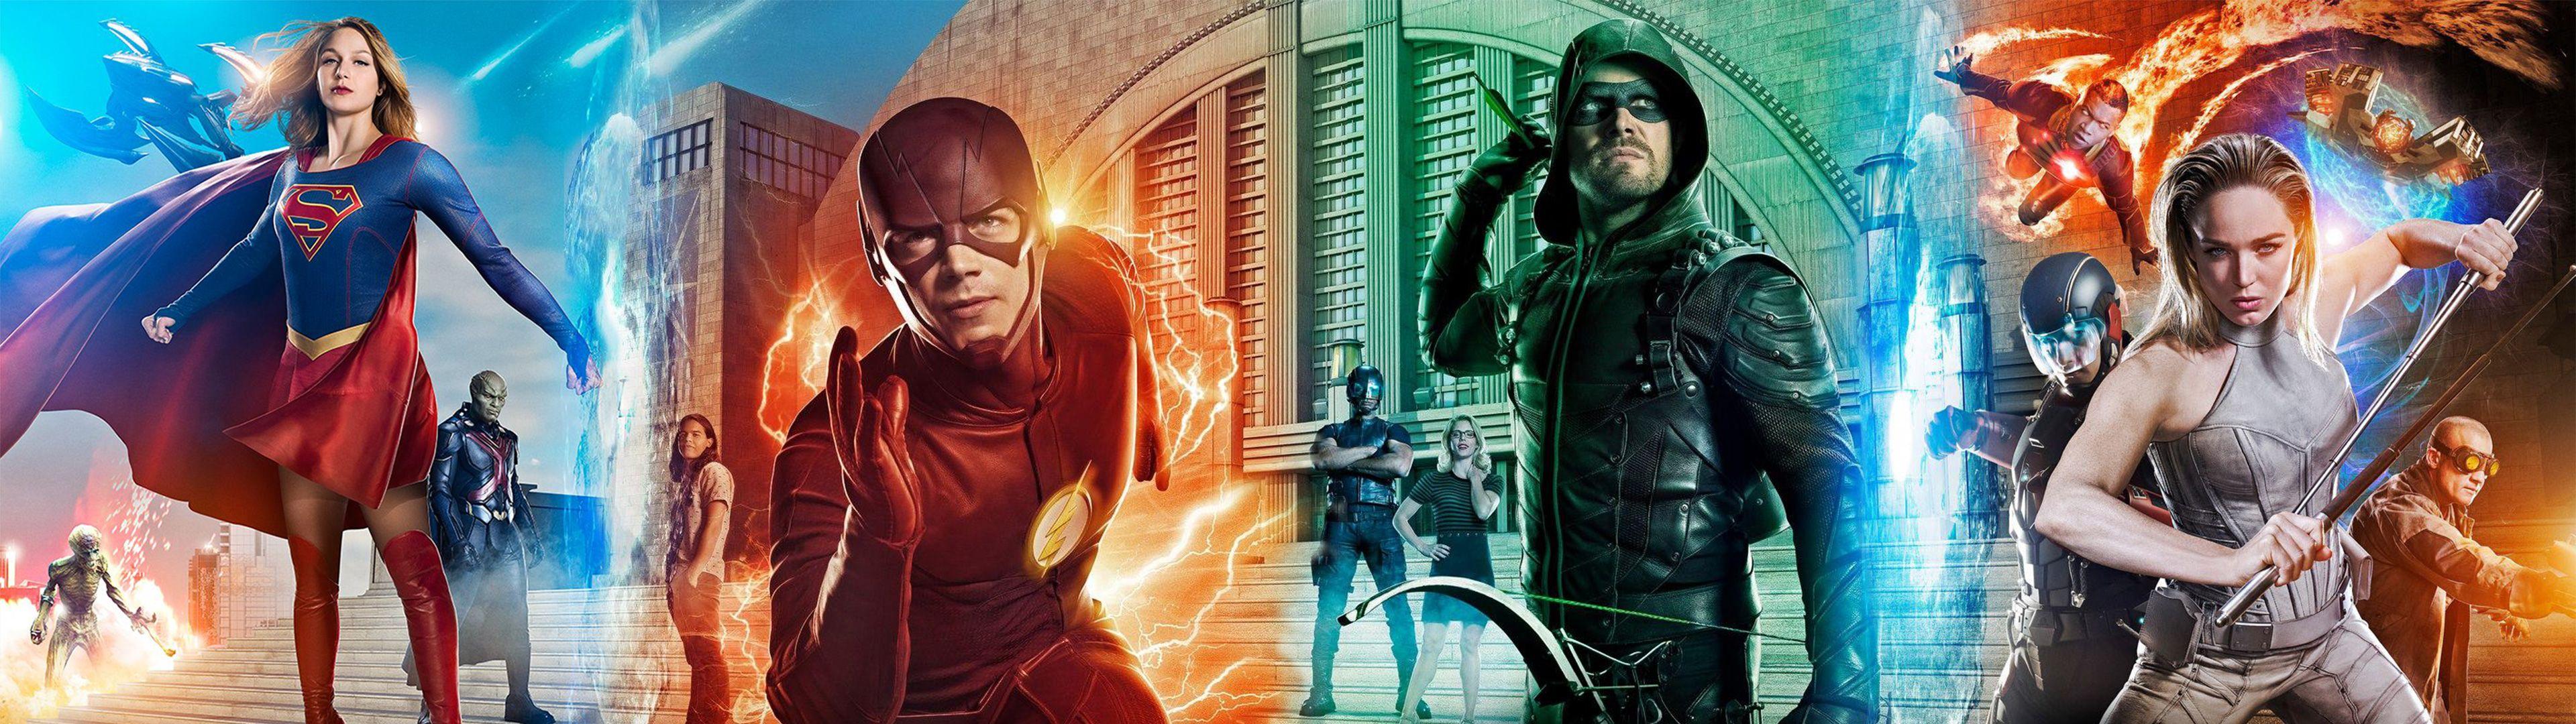 DC Universe Flash Arrow Supergirl Legends of tomorrow Wide Posters